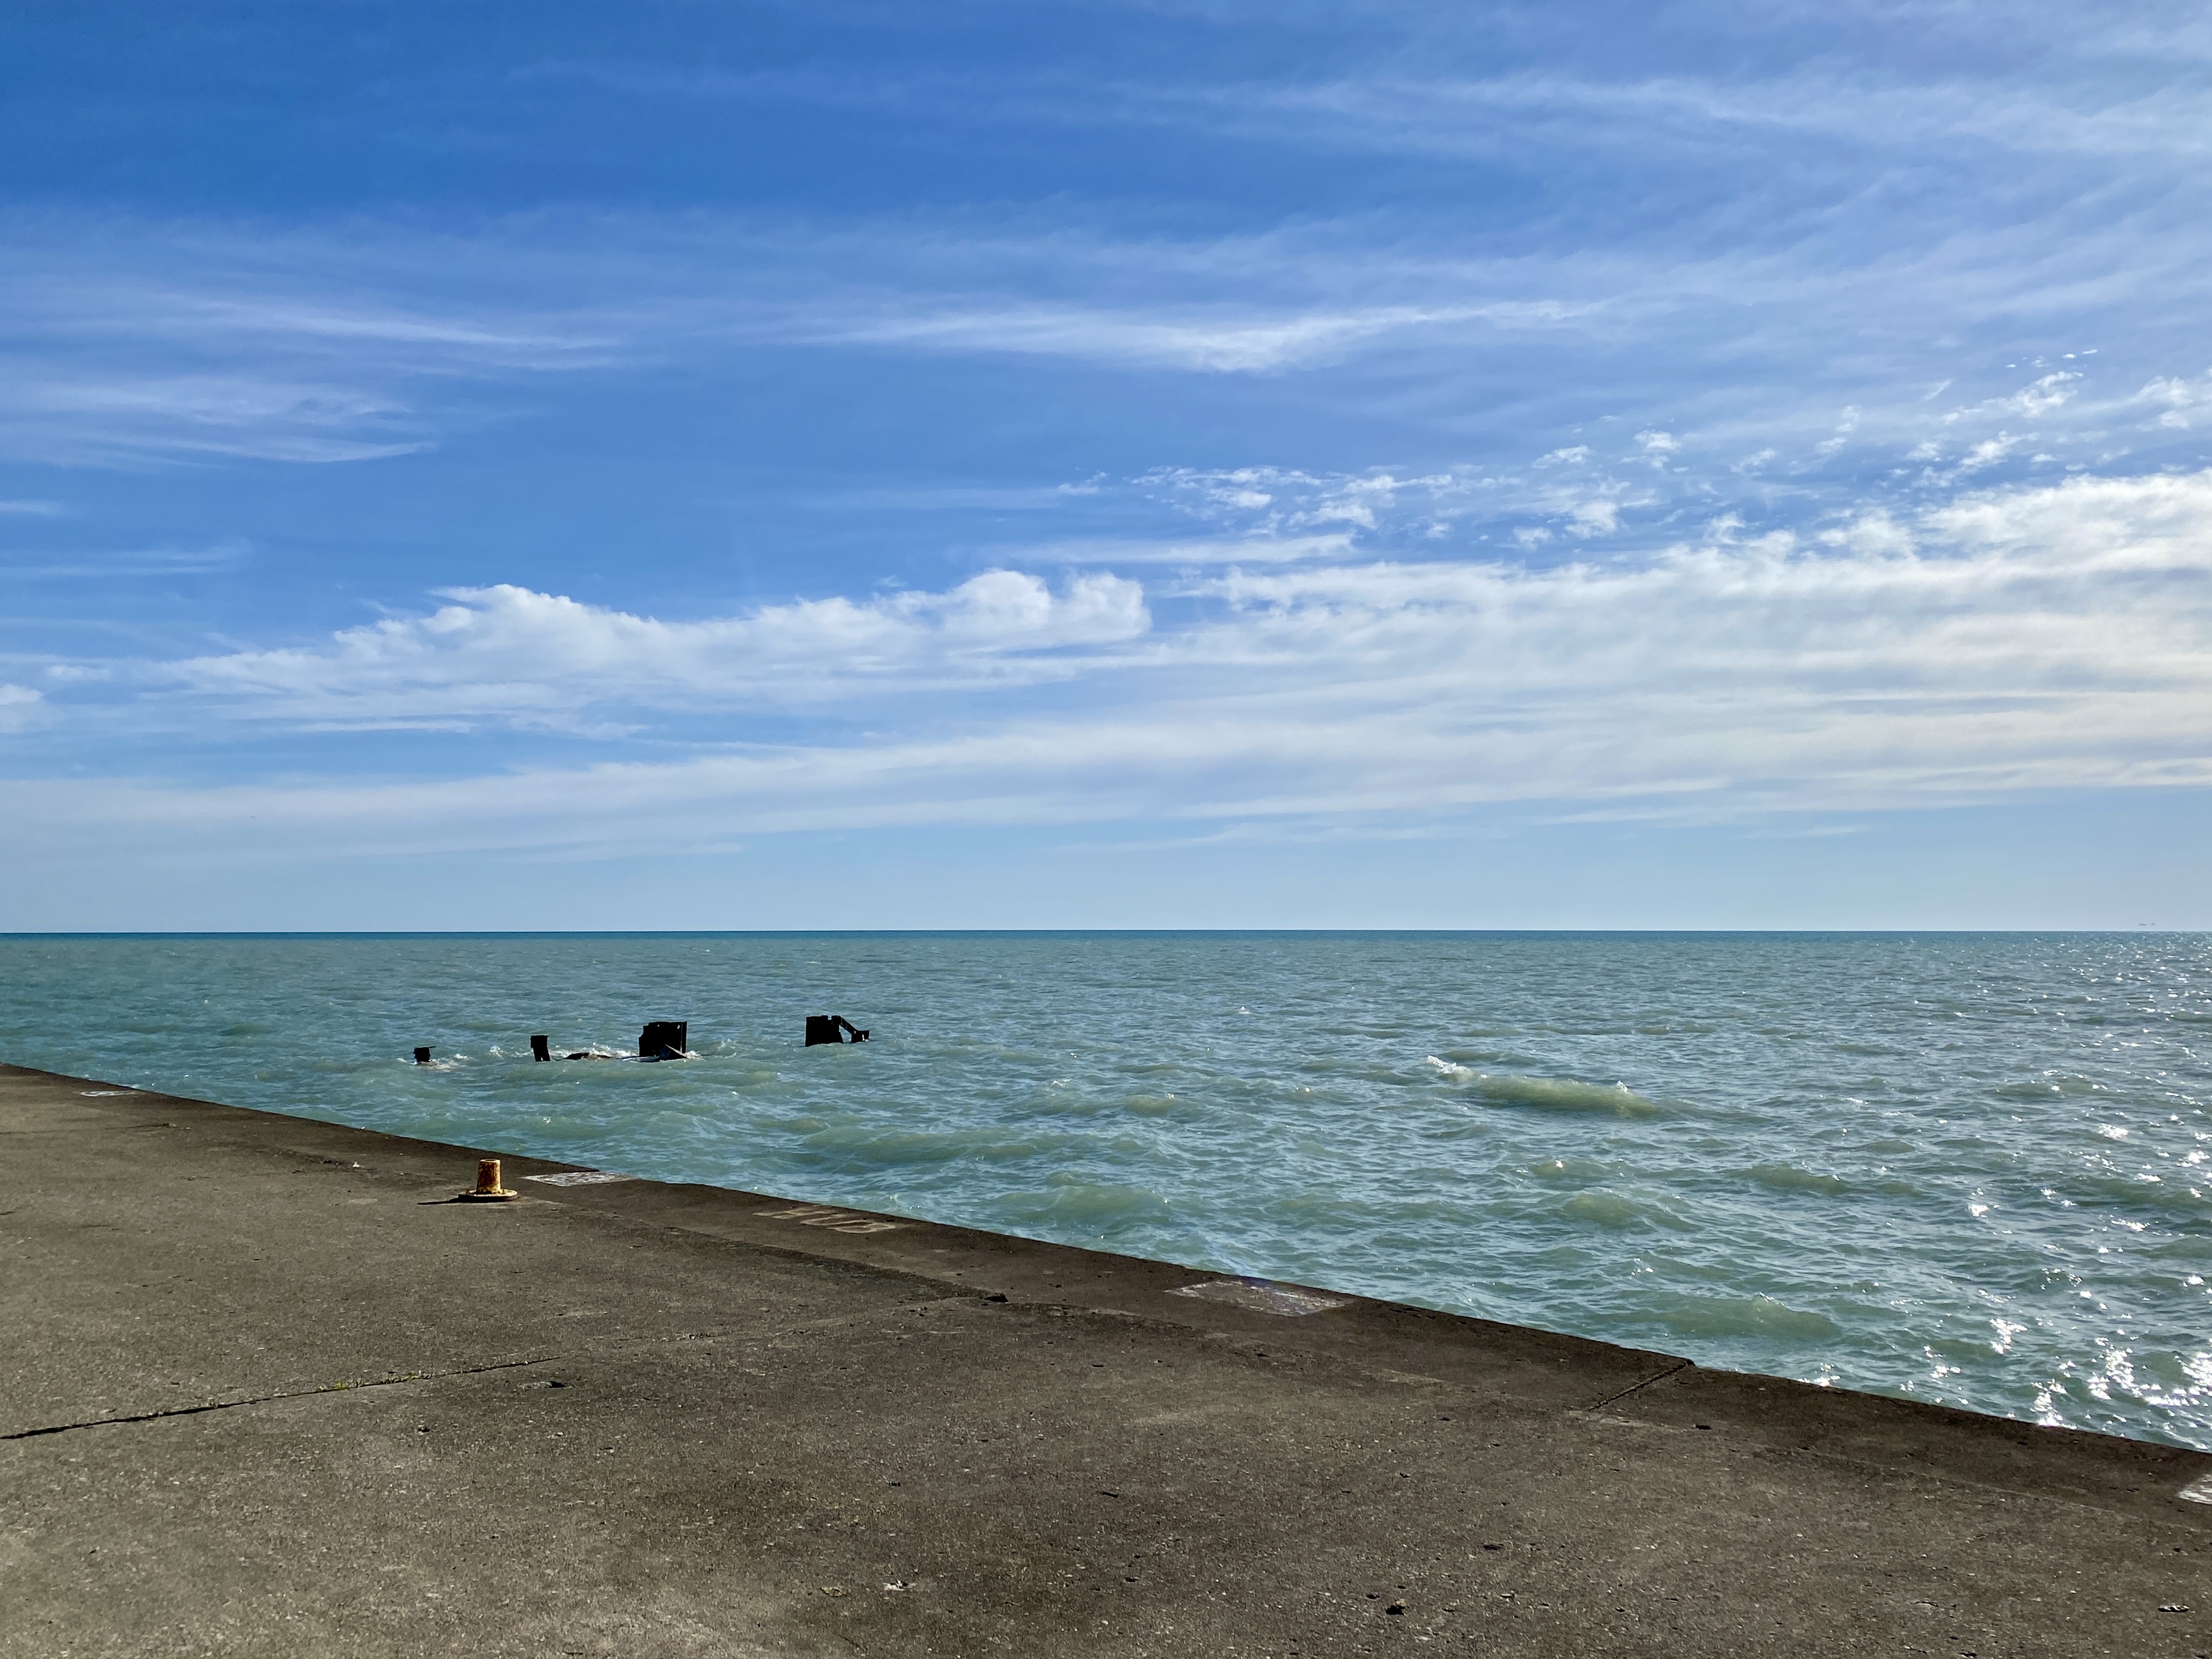 Horizon of large Lake Michigan with a bright blue sky swept with clouds and turquoise-shaded water with small waves